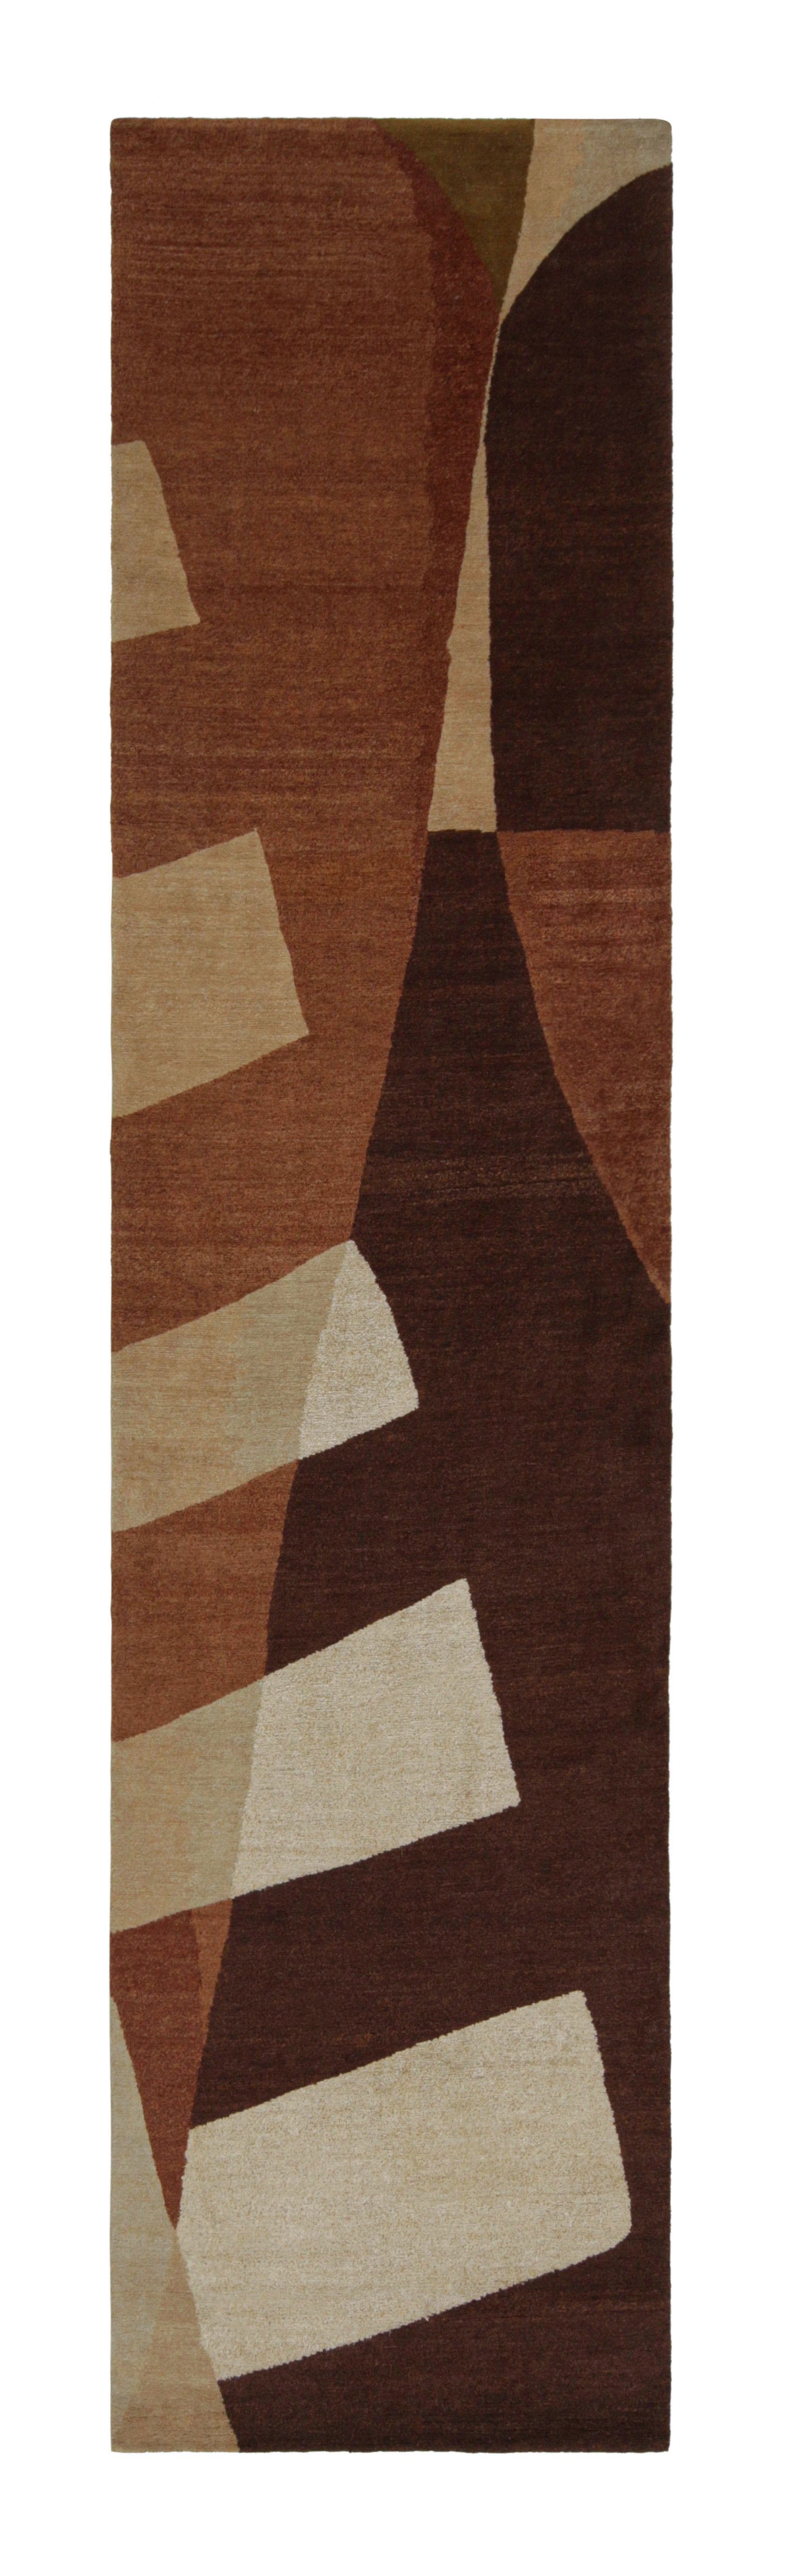 Rug & Kilim’s Art Deco Style runner with Geometric Patterns in Tones of Brown For Sale